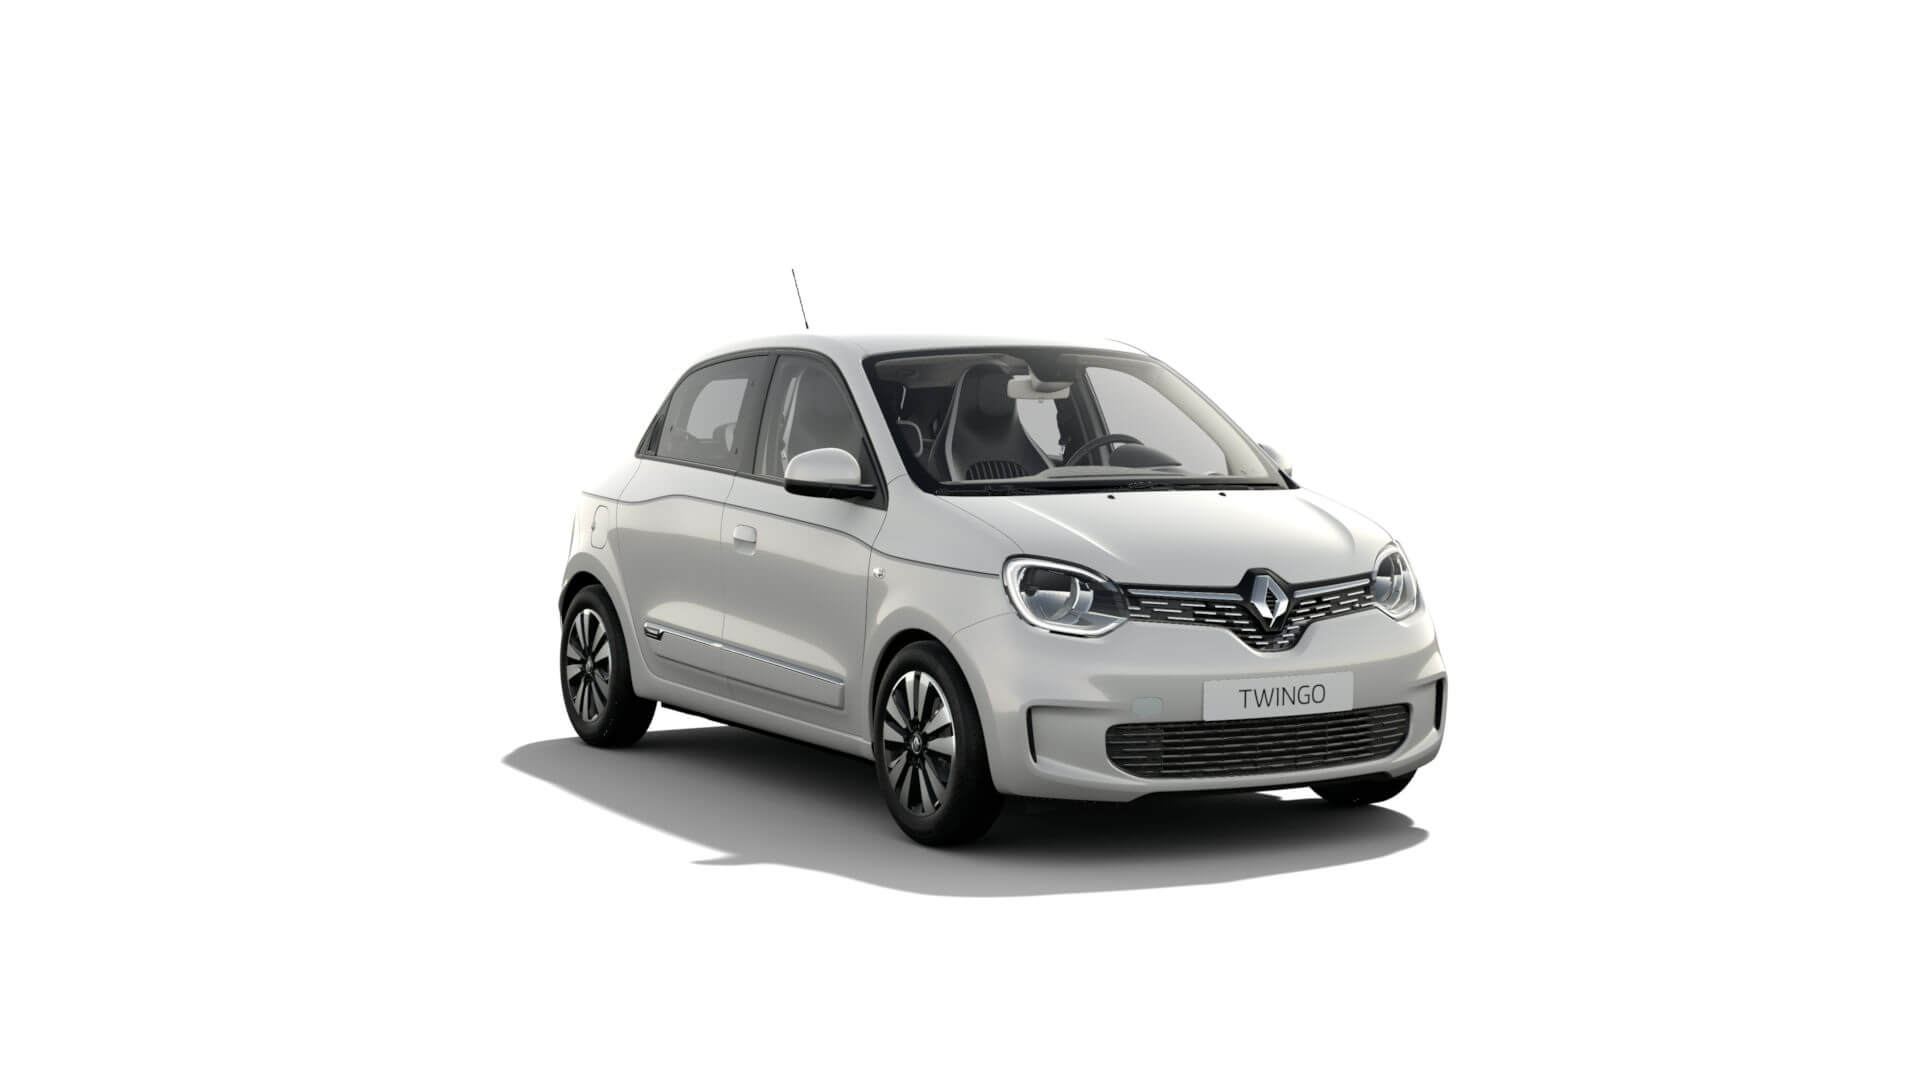 Automodell weiß - Renault Twingo - Renault Ahrens Hannover